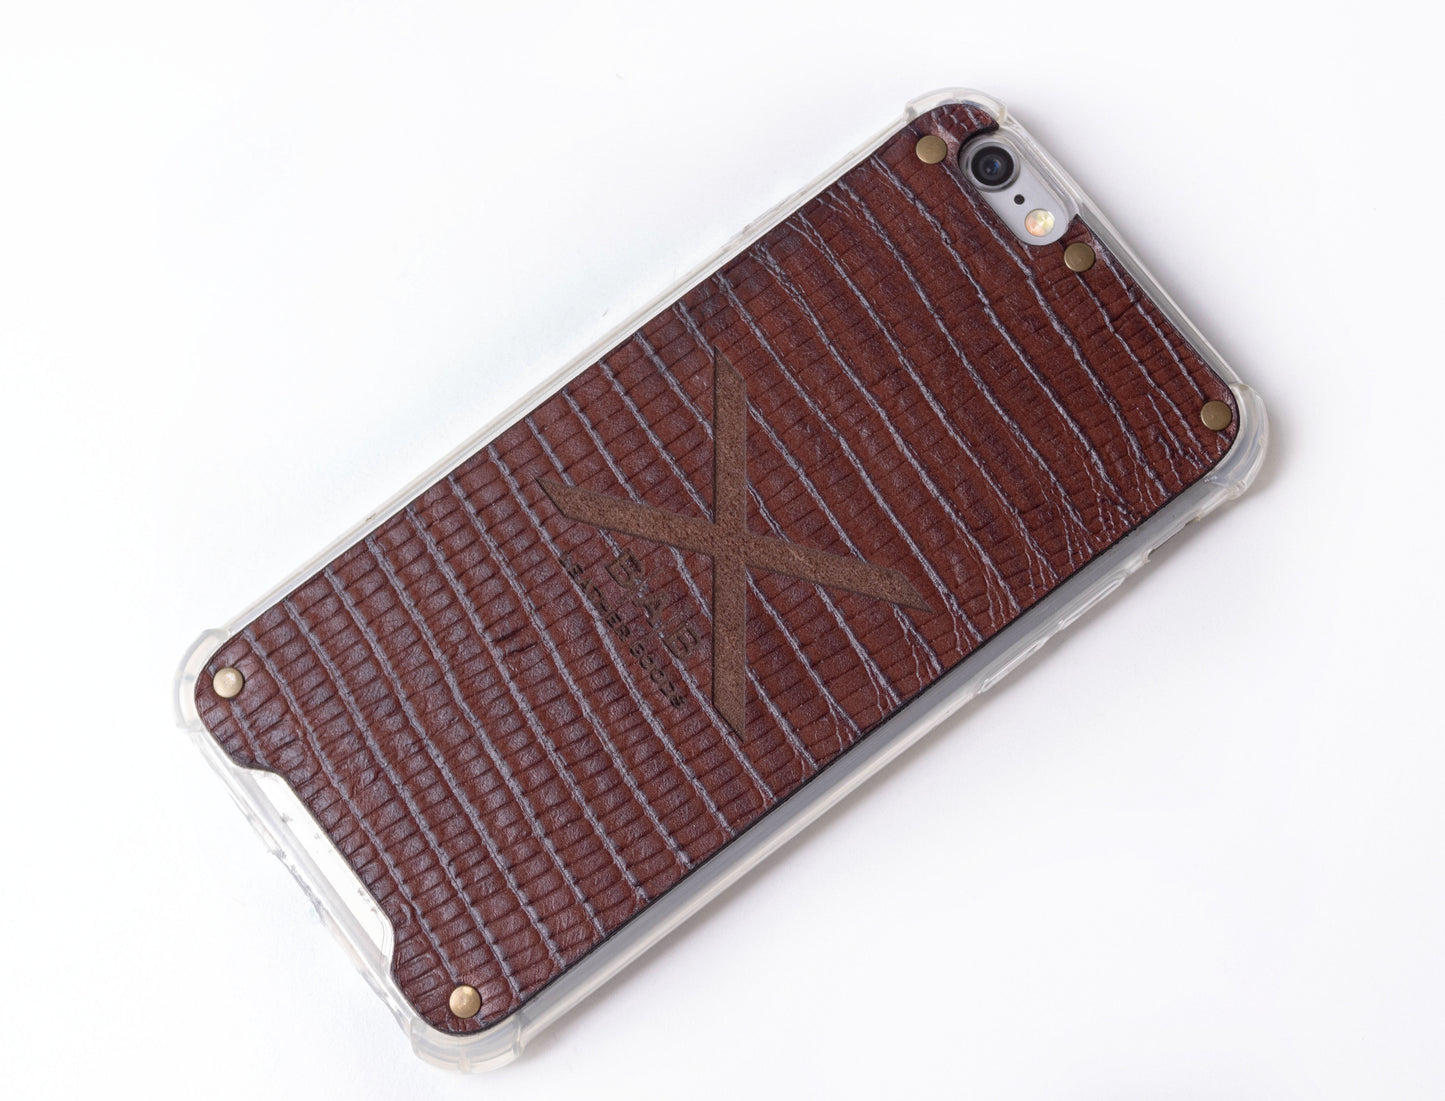 Textured Brown Lizard Patent Genuine Leather iPhone Case cut and laser engraved, 5 Bronze Rivets.- F36